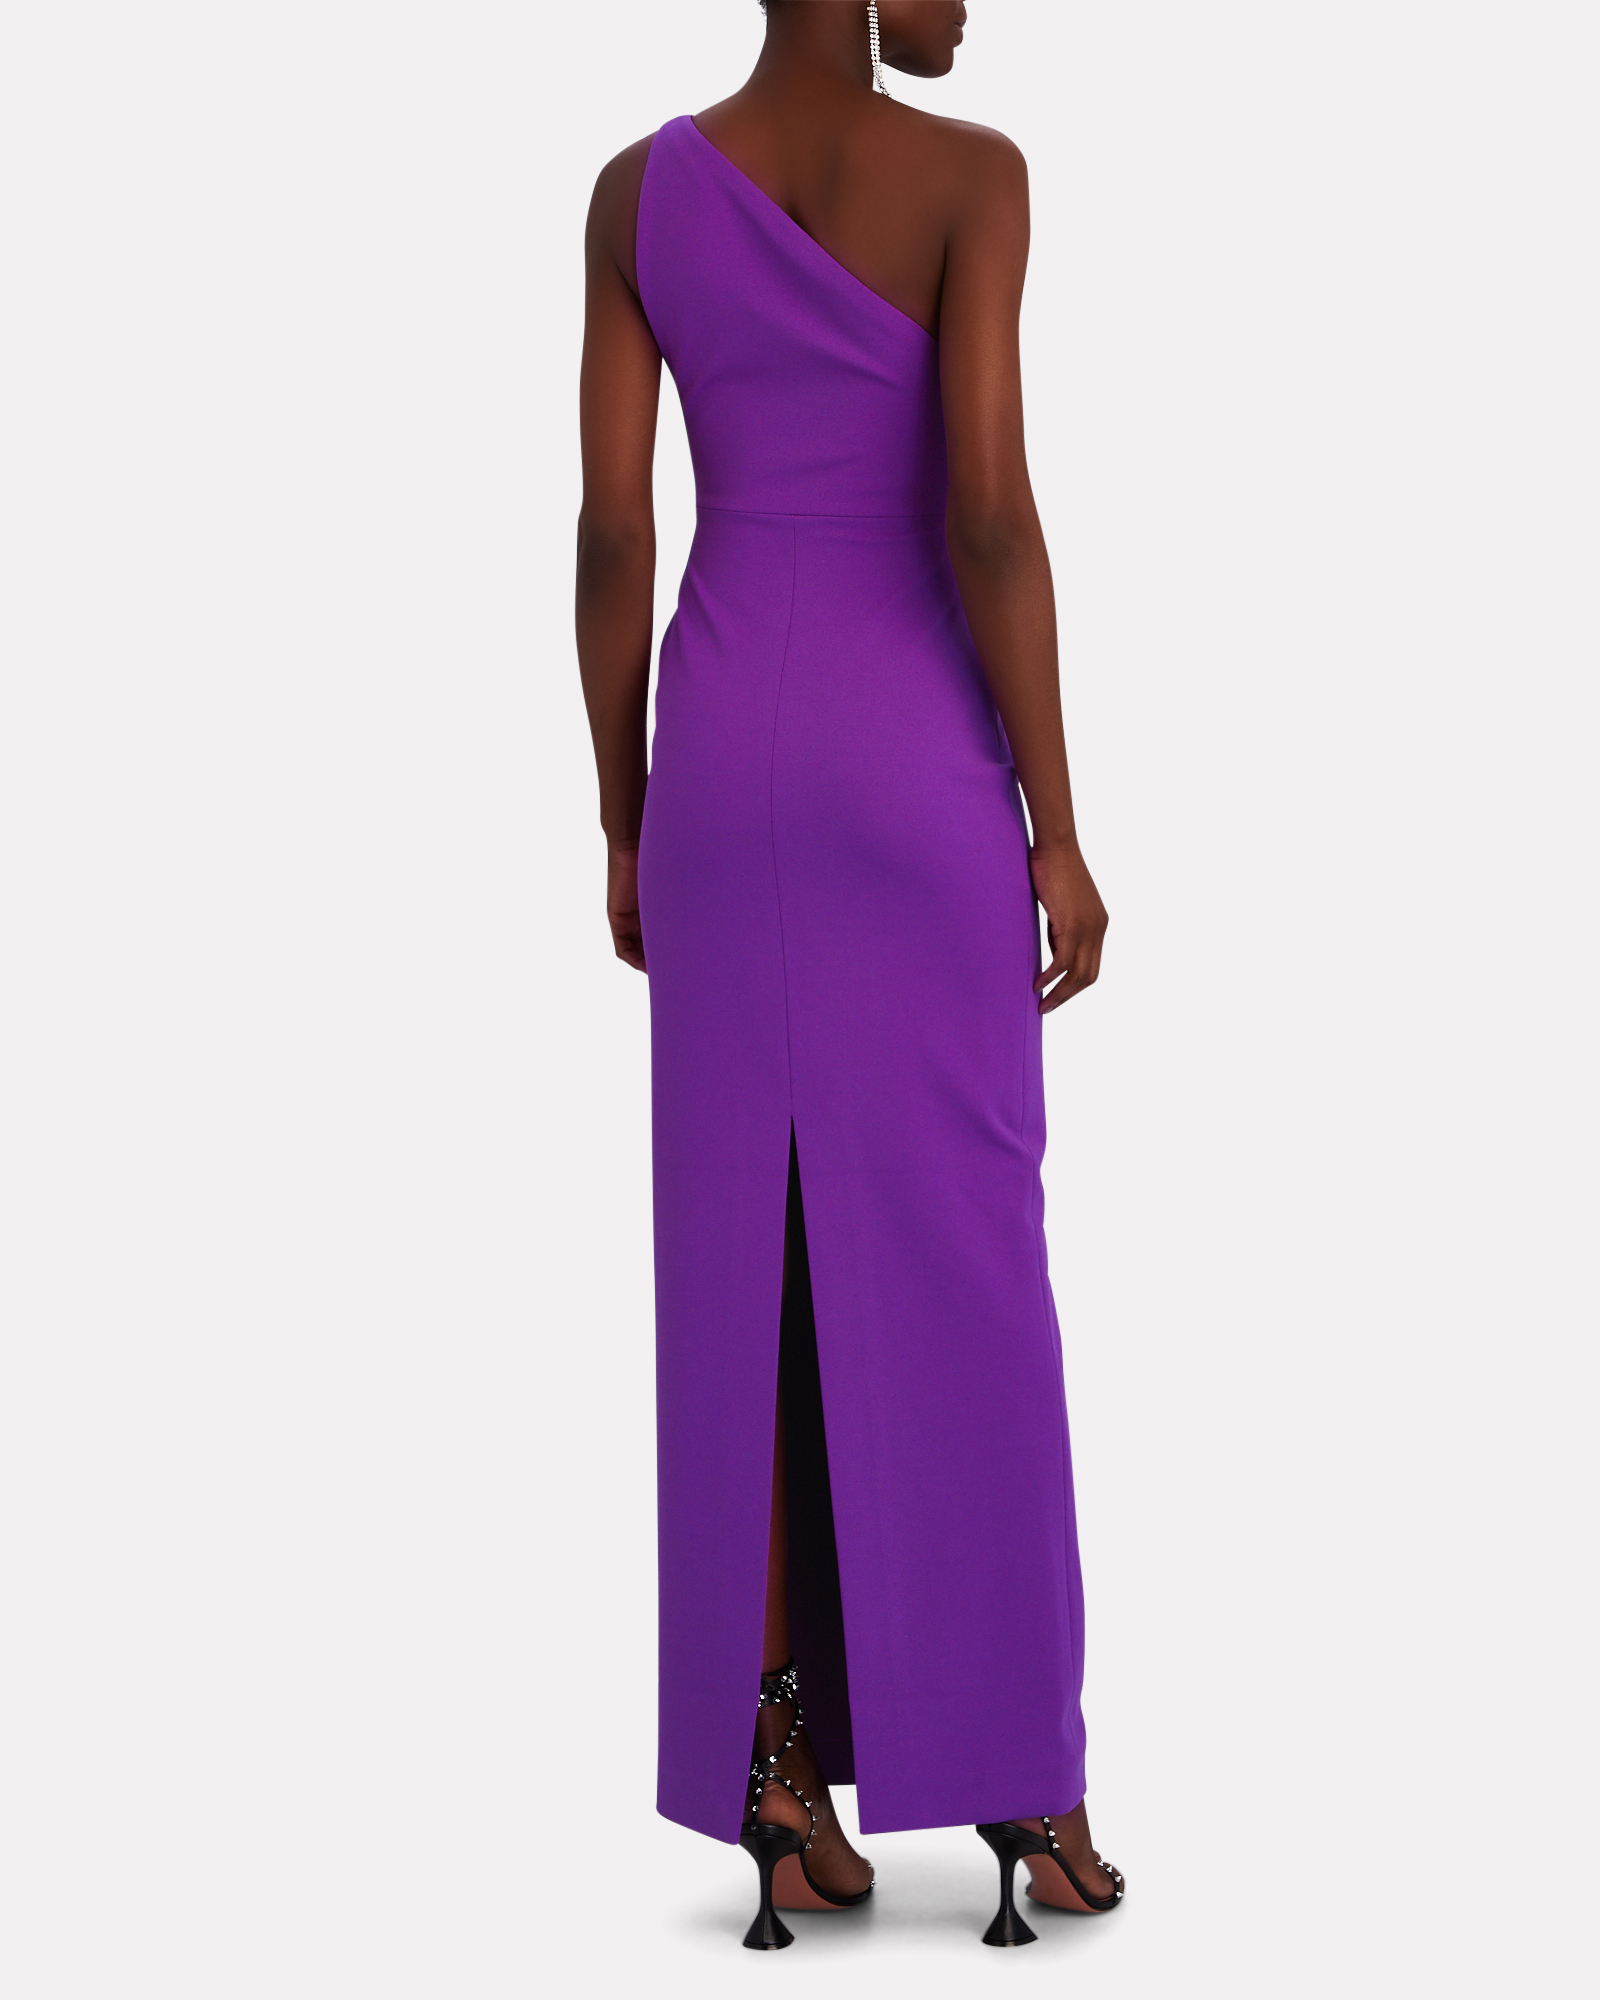 Solace London Nadina One-Shoulder Gown | INTERMIX®